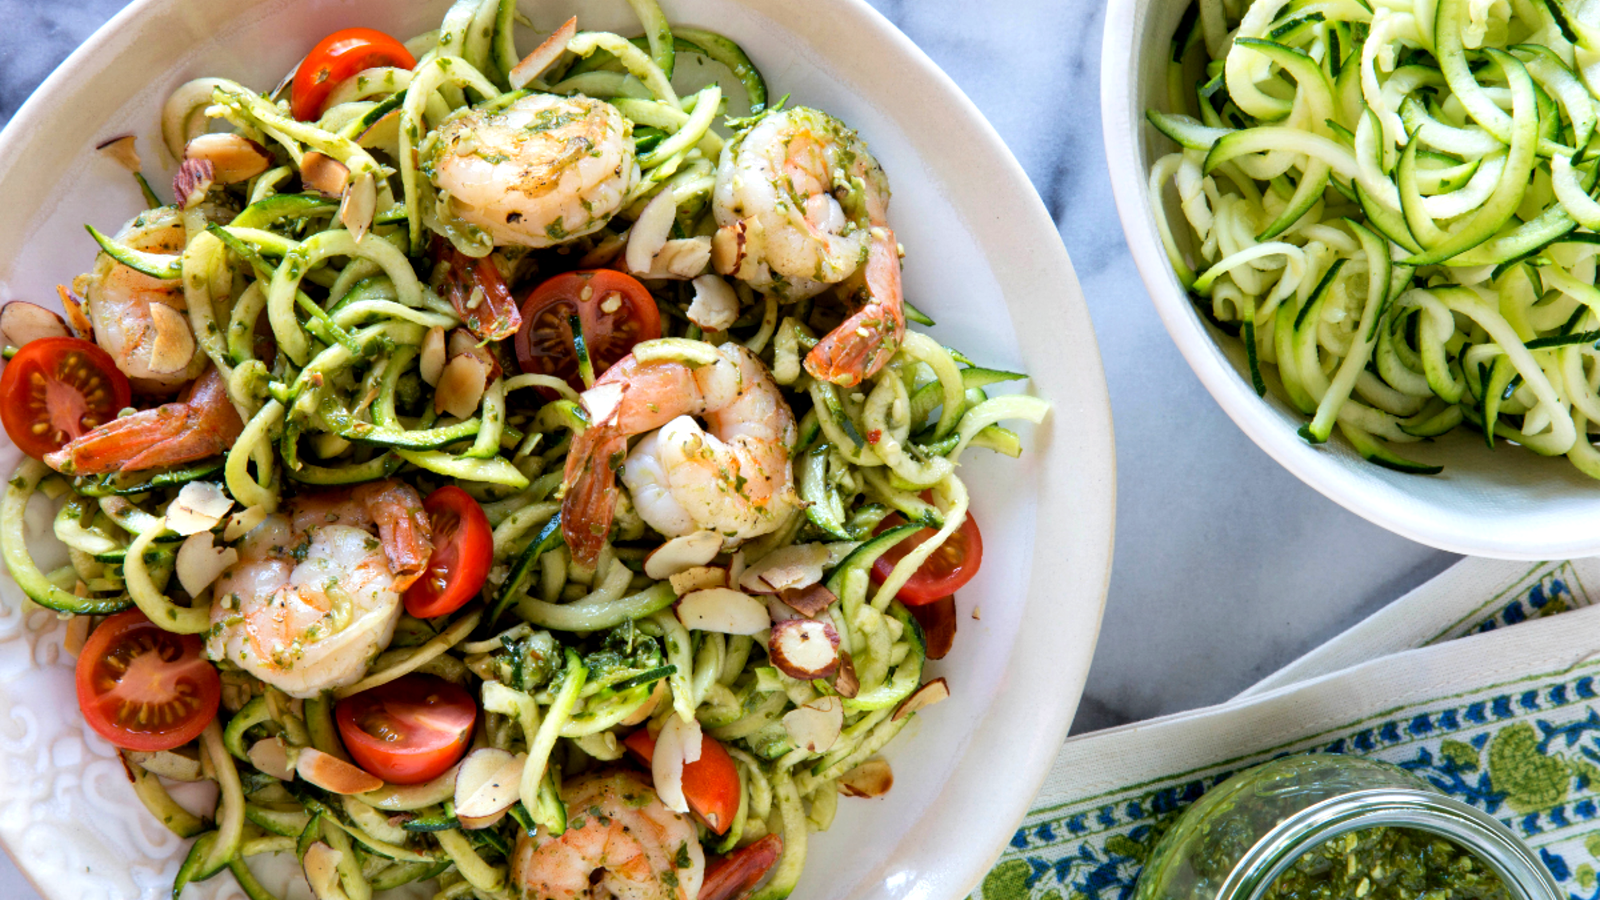 Image of Zucchini Noodles And Grilled Shrimp With Almond Lemon Basil Dressing 